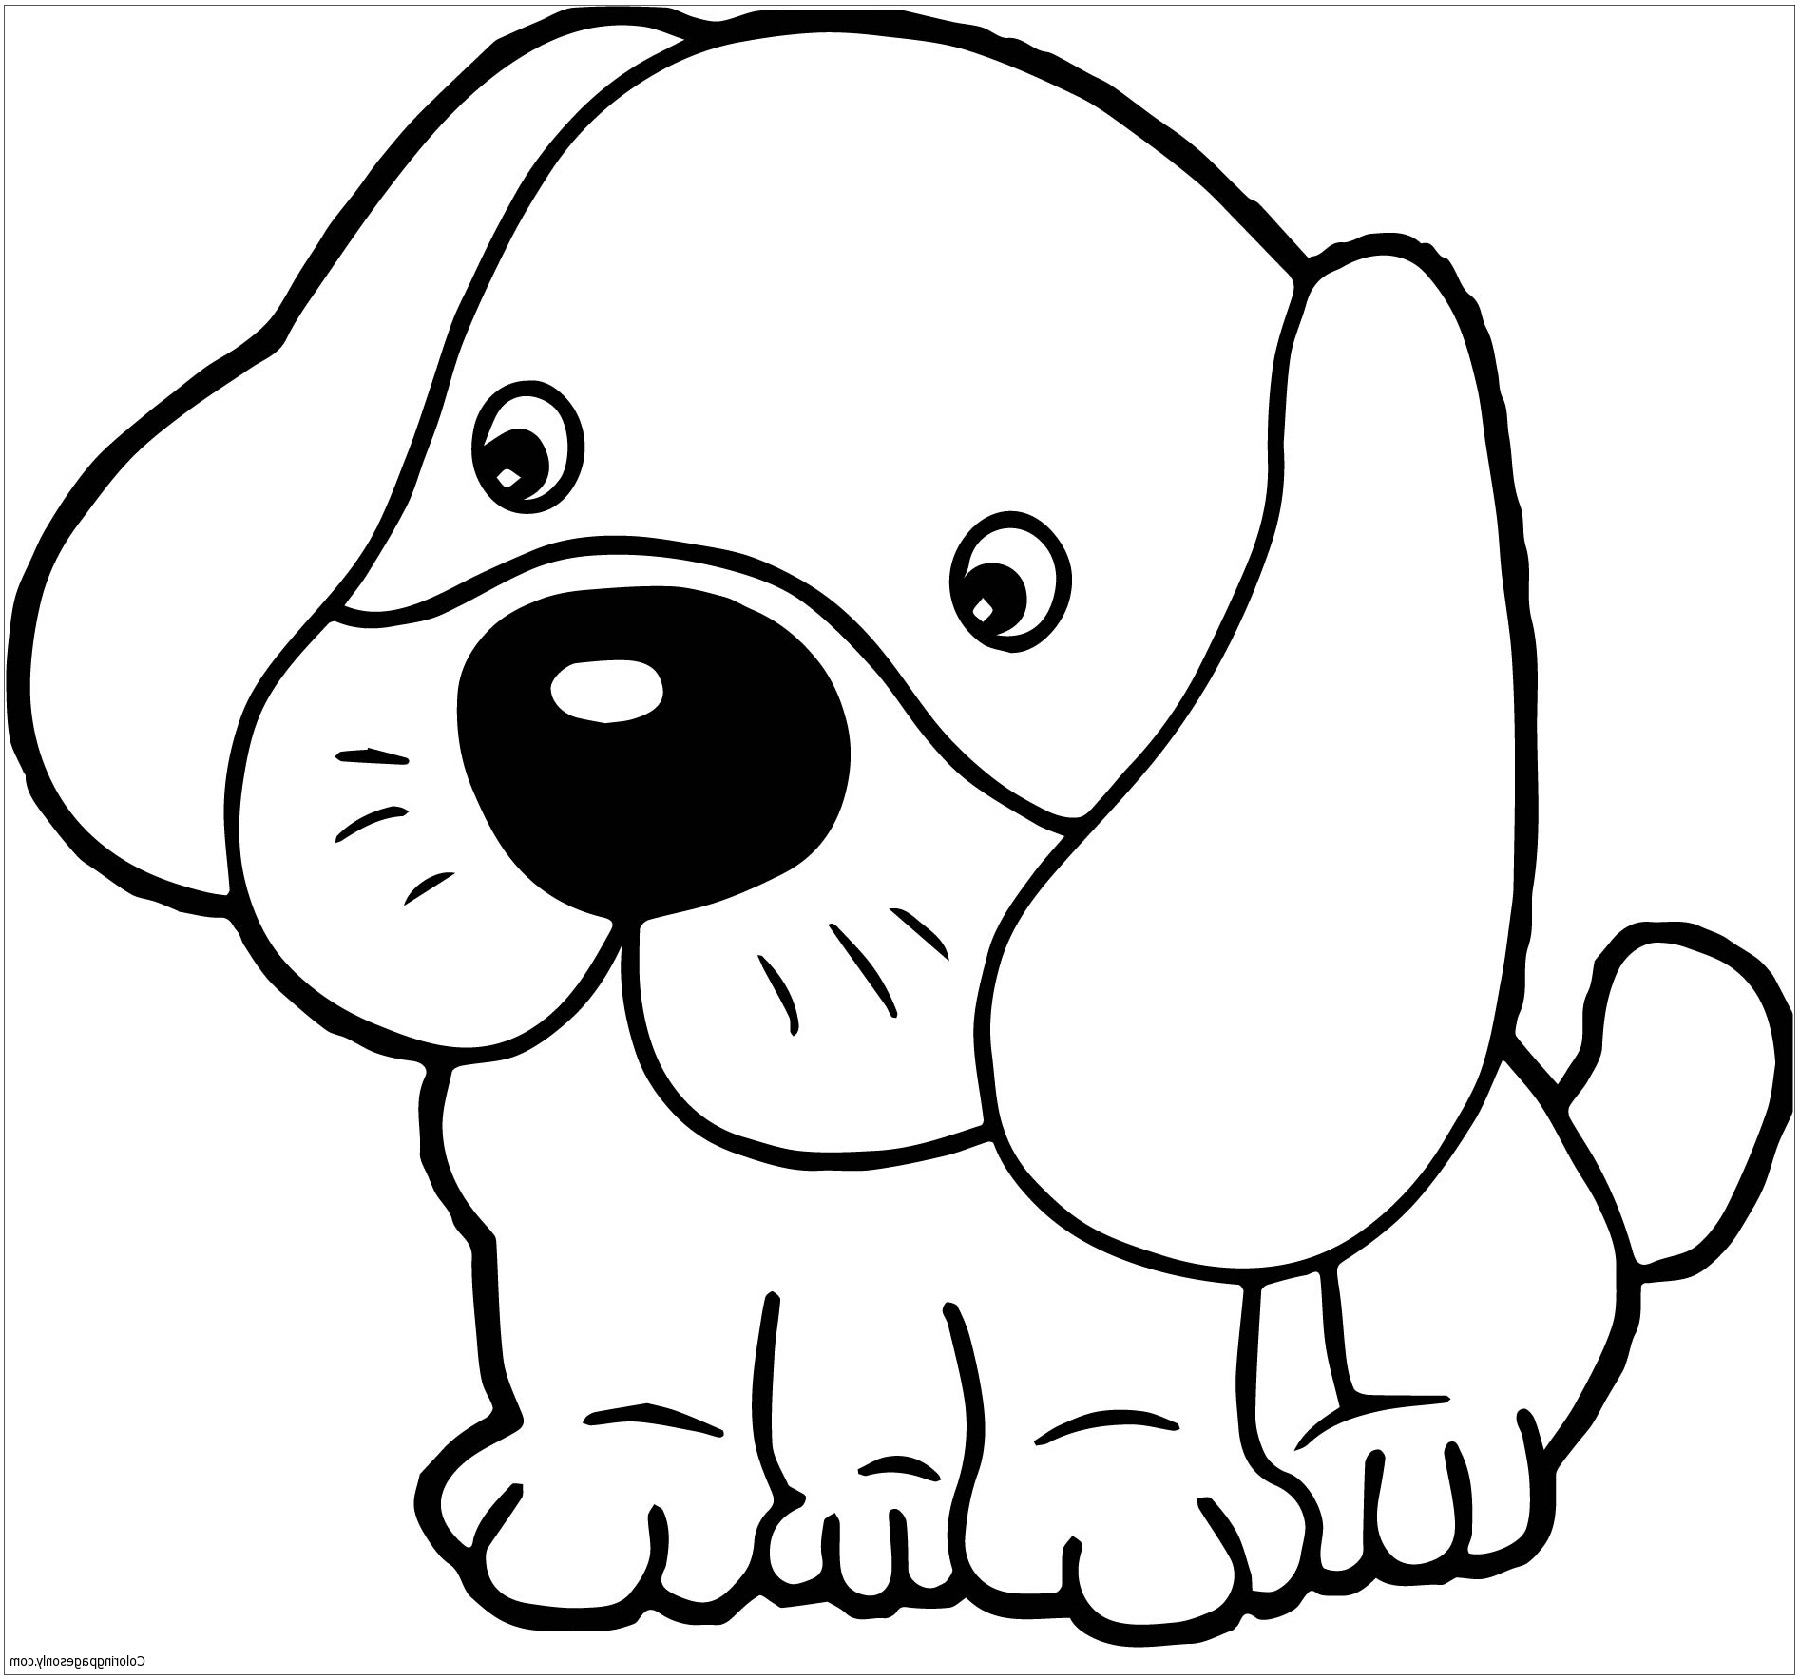 Cute Dog Coloring Pages for Kids to Download | 101 Coloring